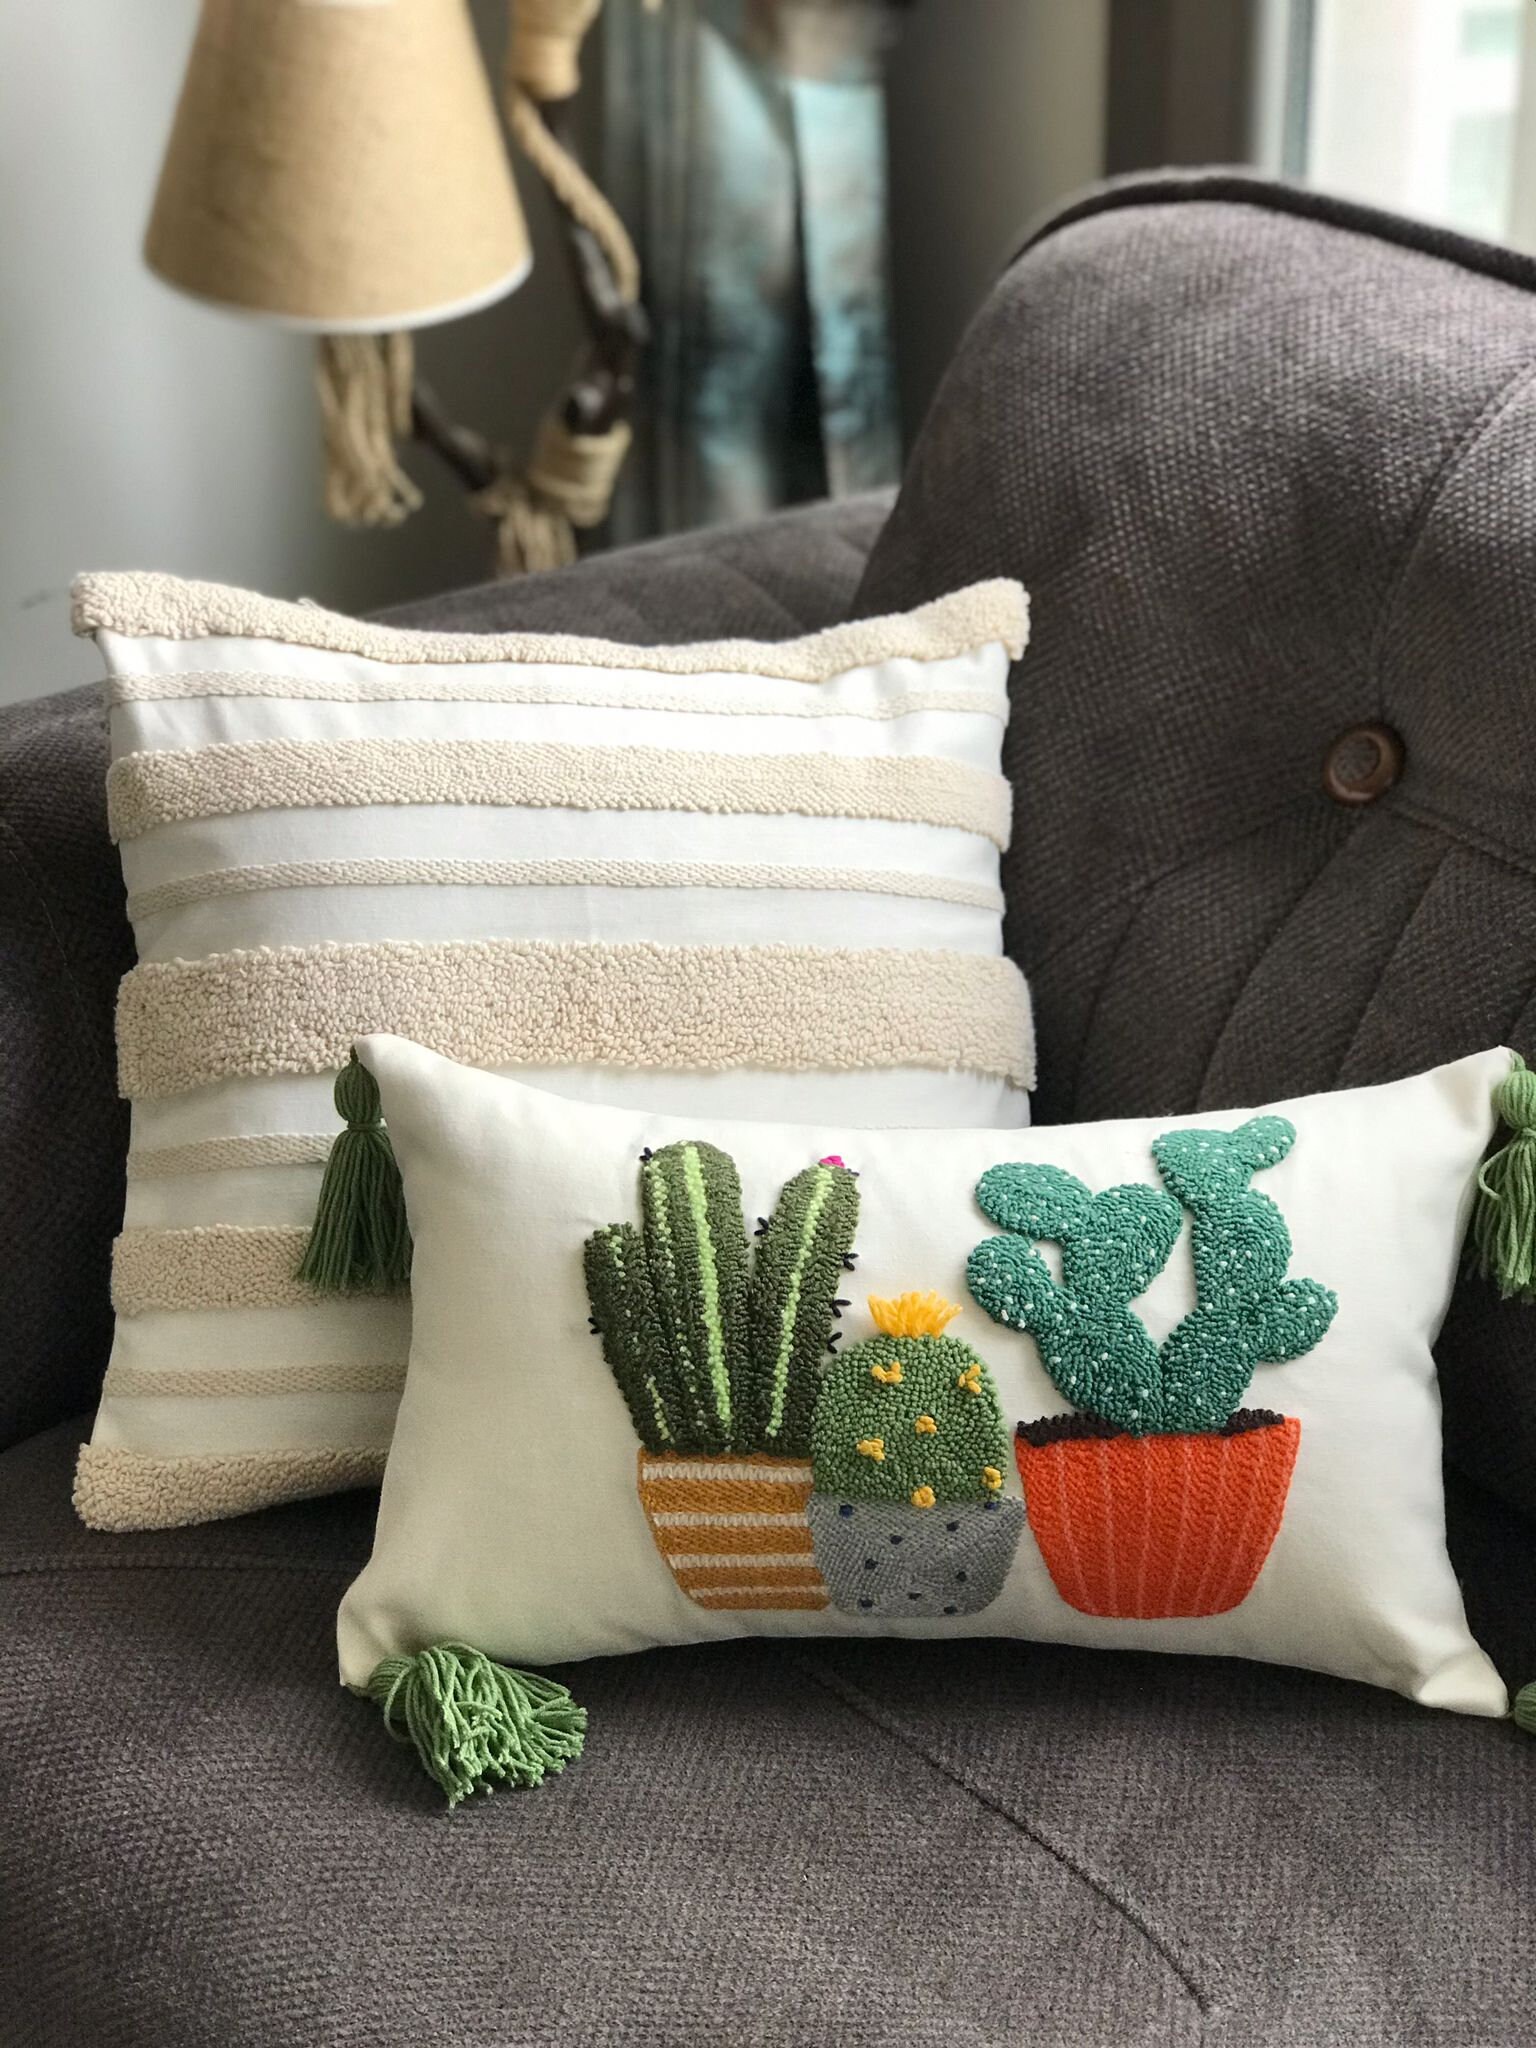 Set of 4 Succulents Cactus Decorative Throw Pillow Covers Cushion Case  Protector, Standard Size 18 x 18 Square, Beige 